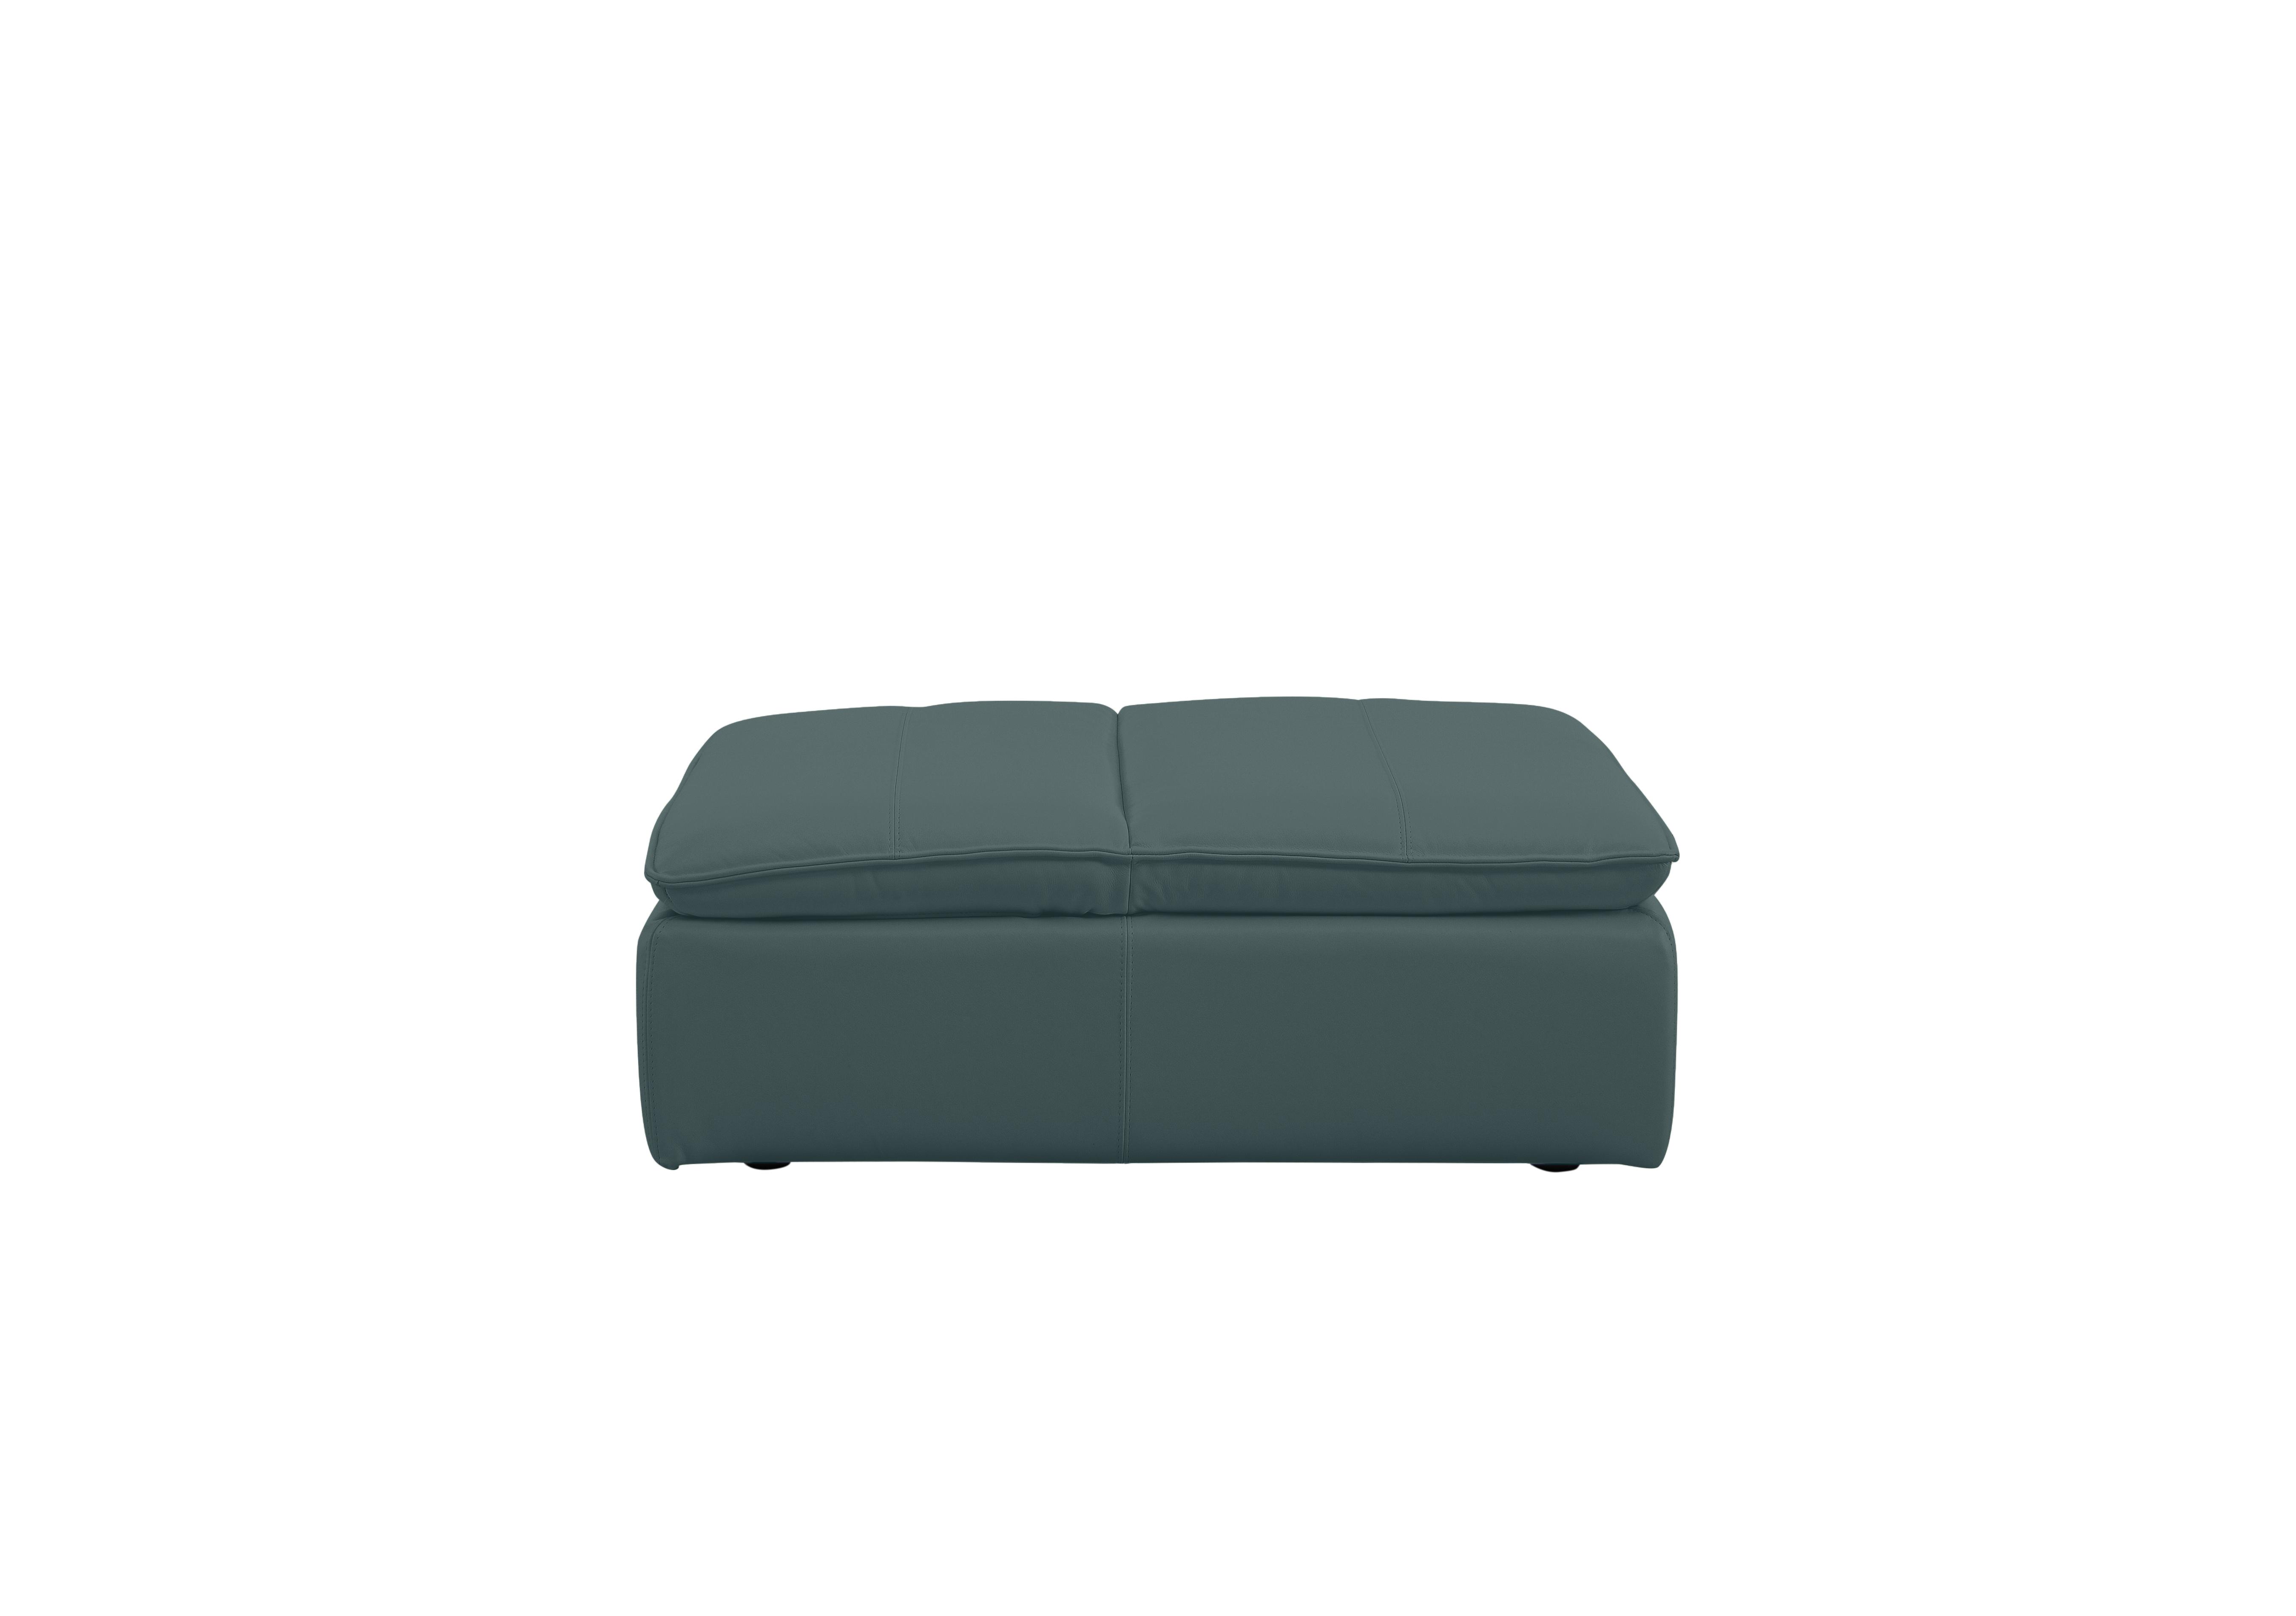 Starlight Express Leather Chair Footstool in Bv-301e Lake Green on Furniture Village